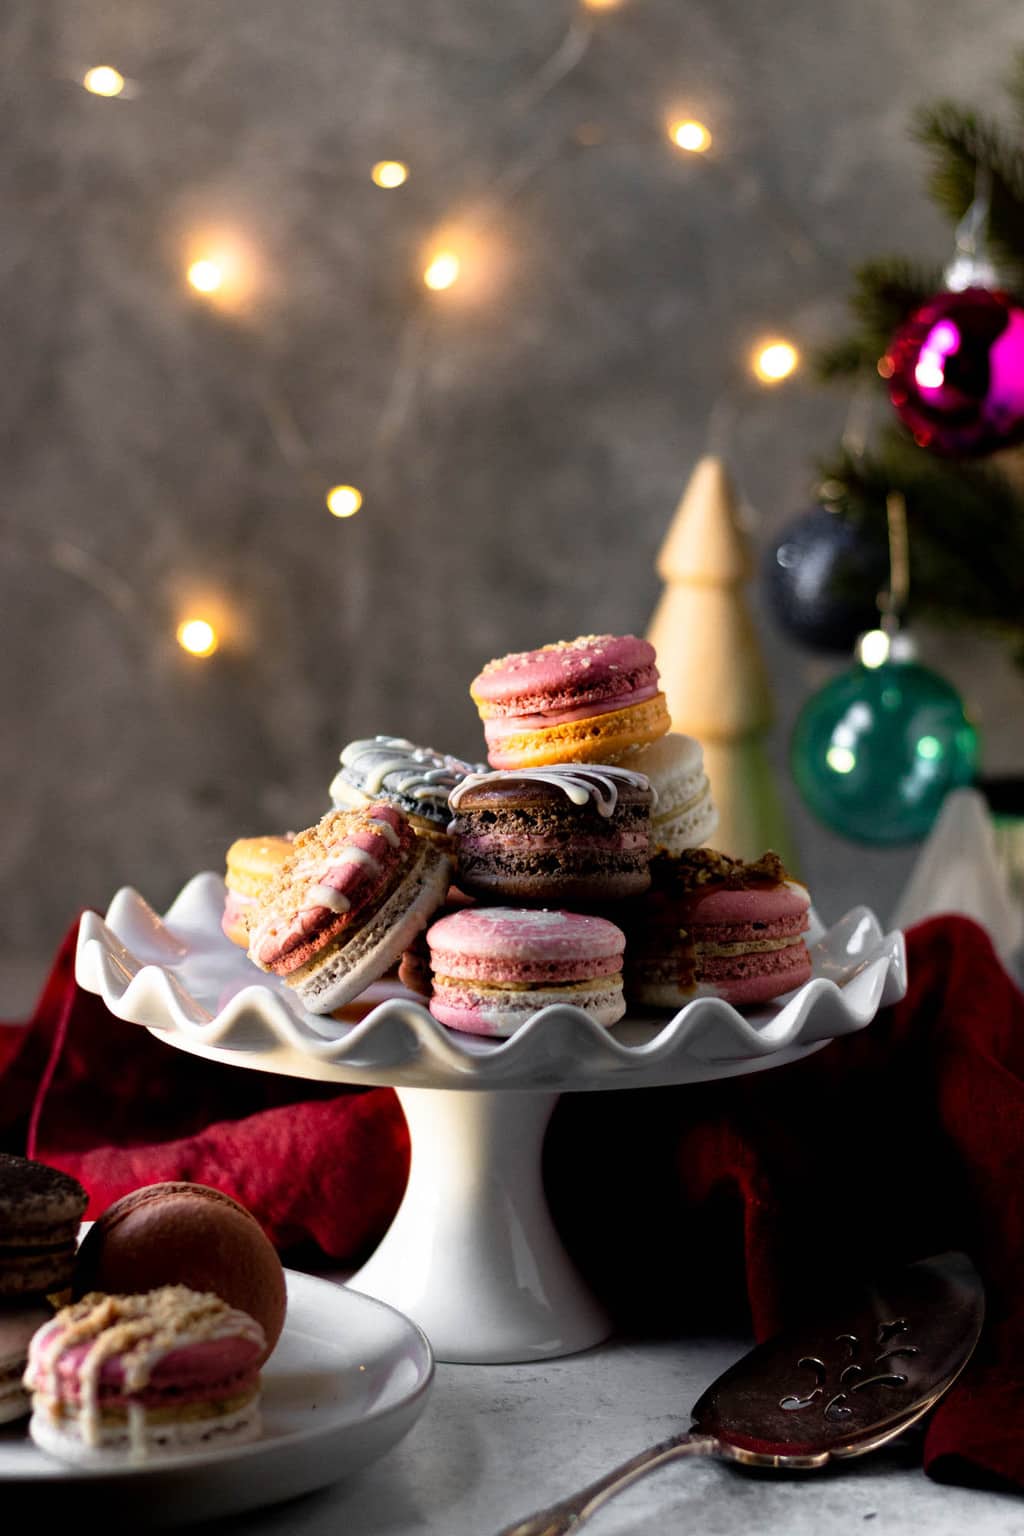 A cake stand of macarons in front of fairy lights and a Christmas tree.